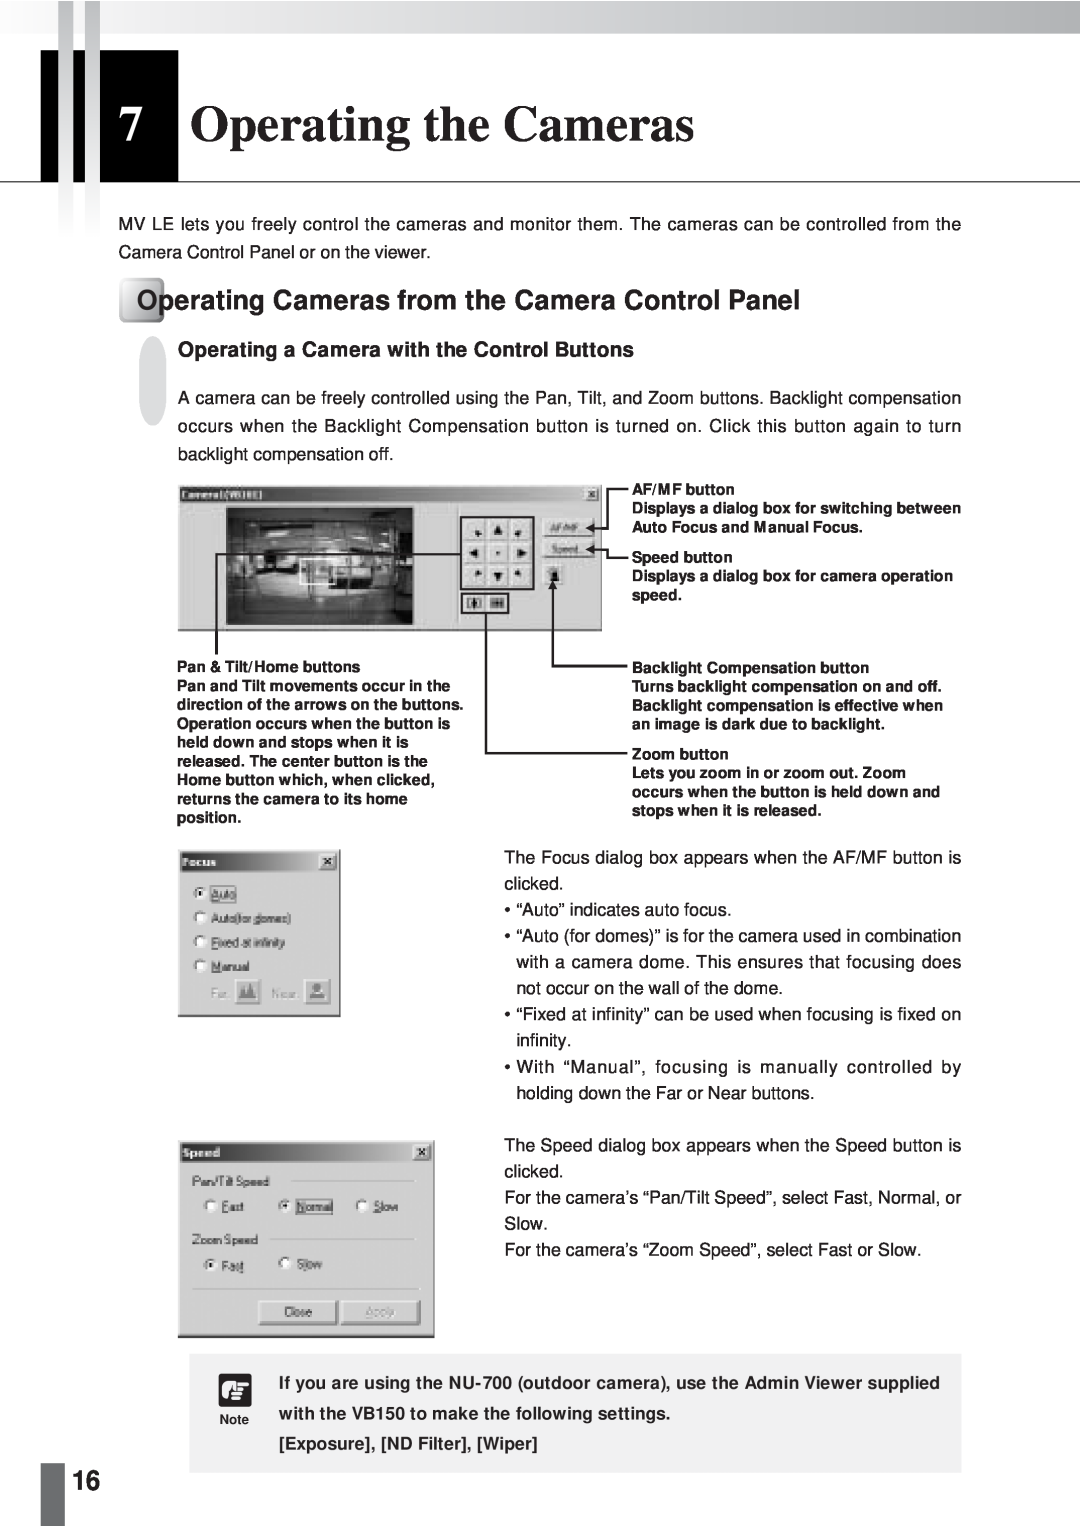 Canon 2.1 user manual 7Operating the Cameras, Operating Cameras from the Camera Control Panel 